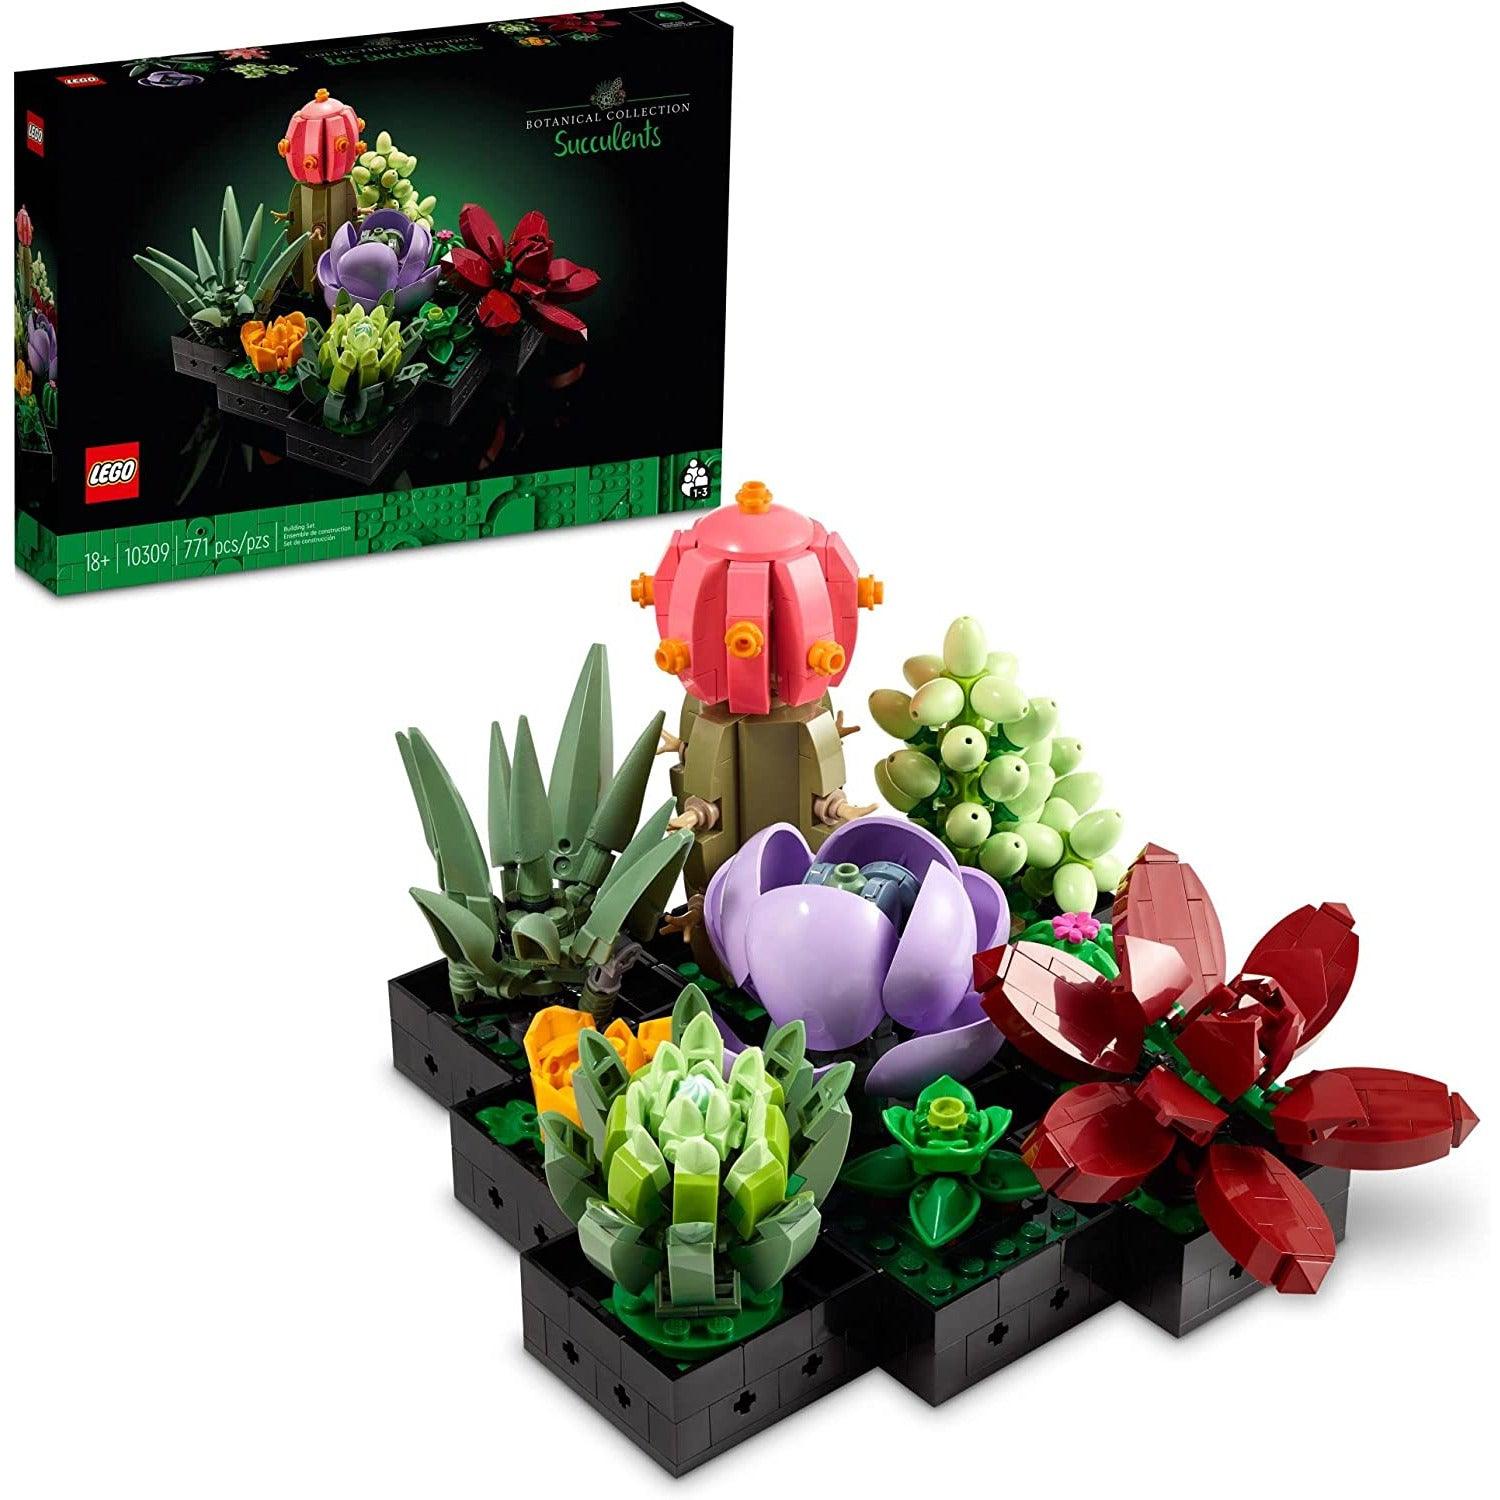 LEGO Icons Succulents 10309 Artificial Plants Set for Adults, Valentines Day Gifts, Home Décor, Creative Gift Idea (771 Pieces) - BumbleToys - 14 Years & Up, 8+ Years, Girls, Ideas, LEGO, OXE, Pre-Order